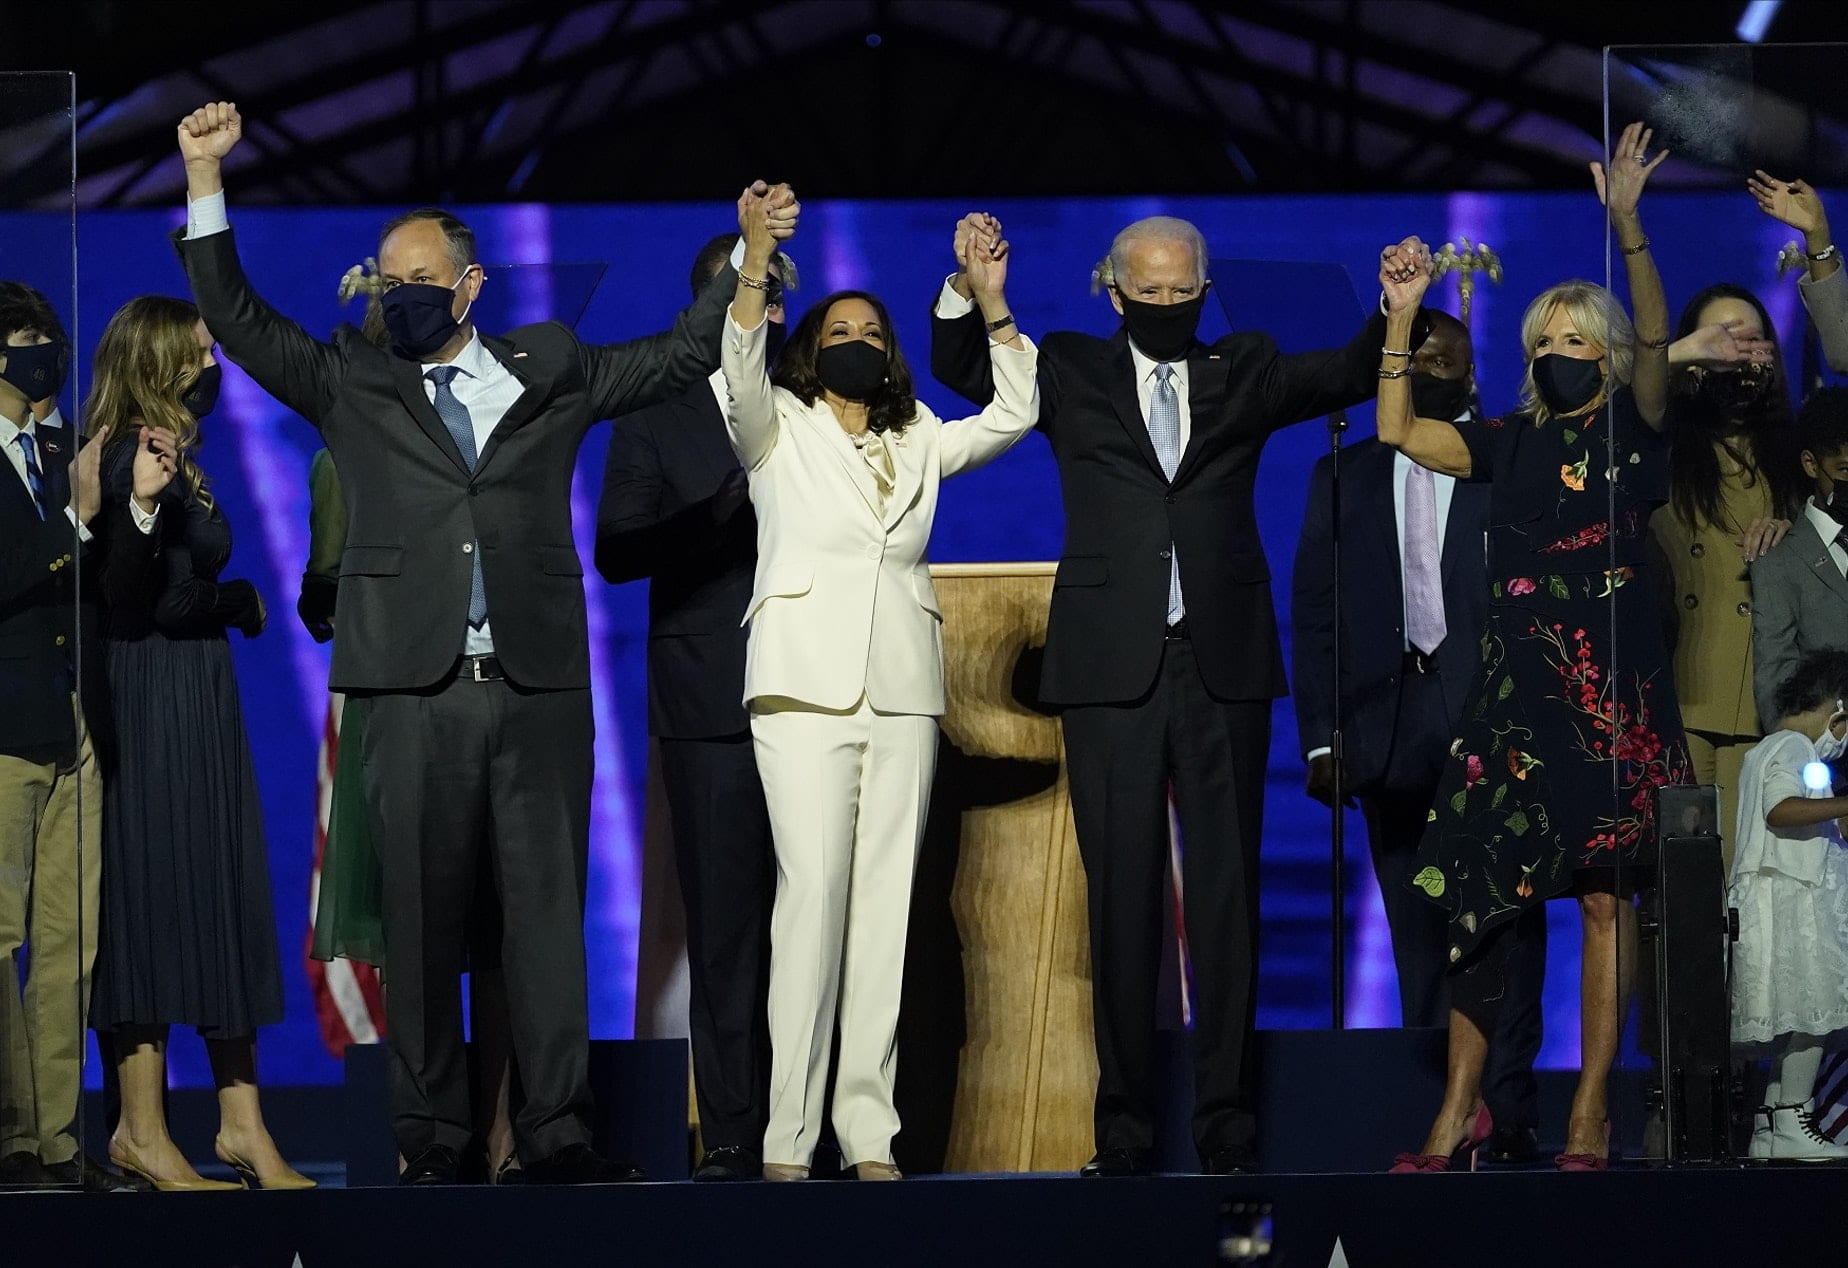 Kamala Harris, Joe Biden, and their spouses stand on stage holding hands